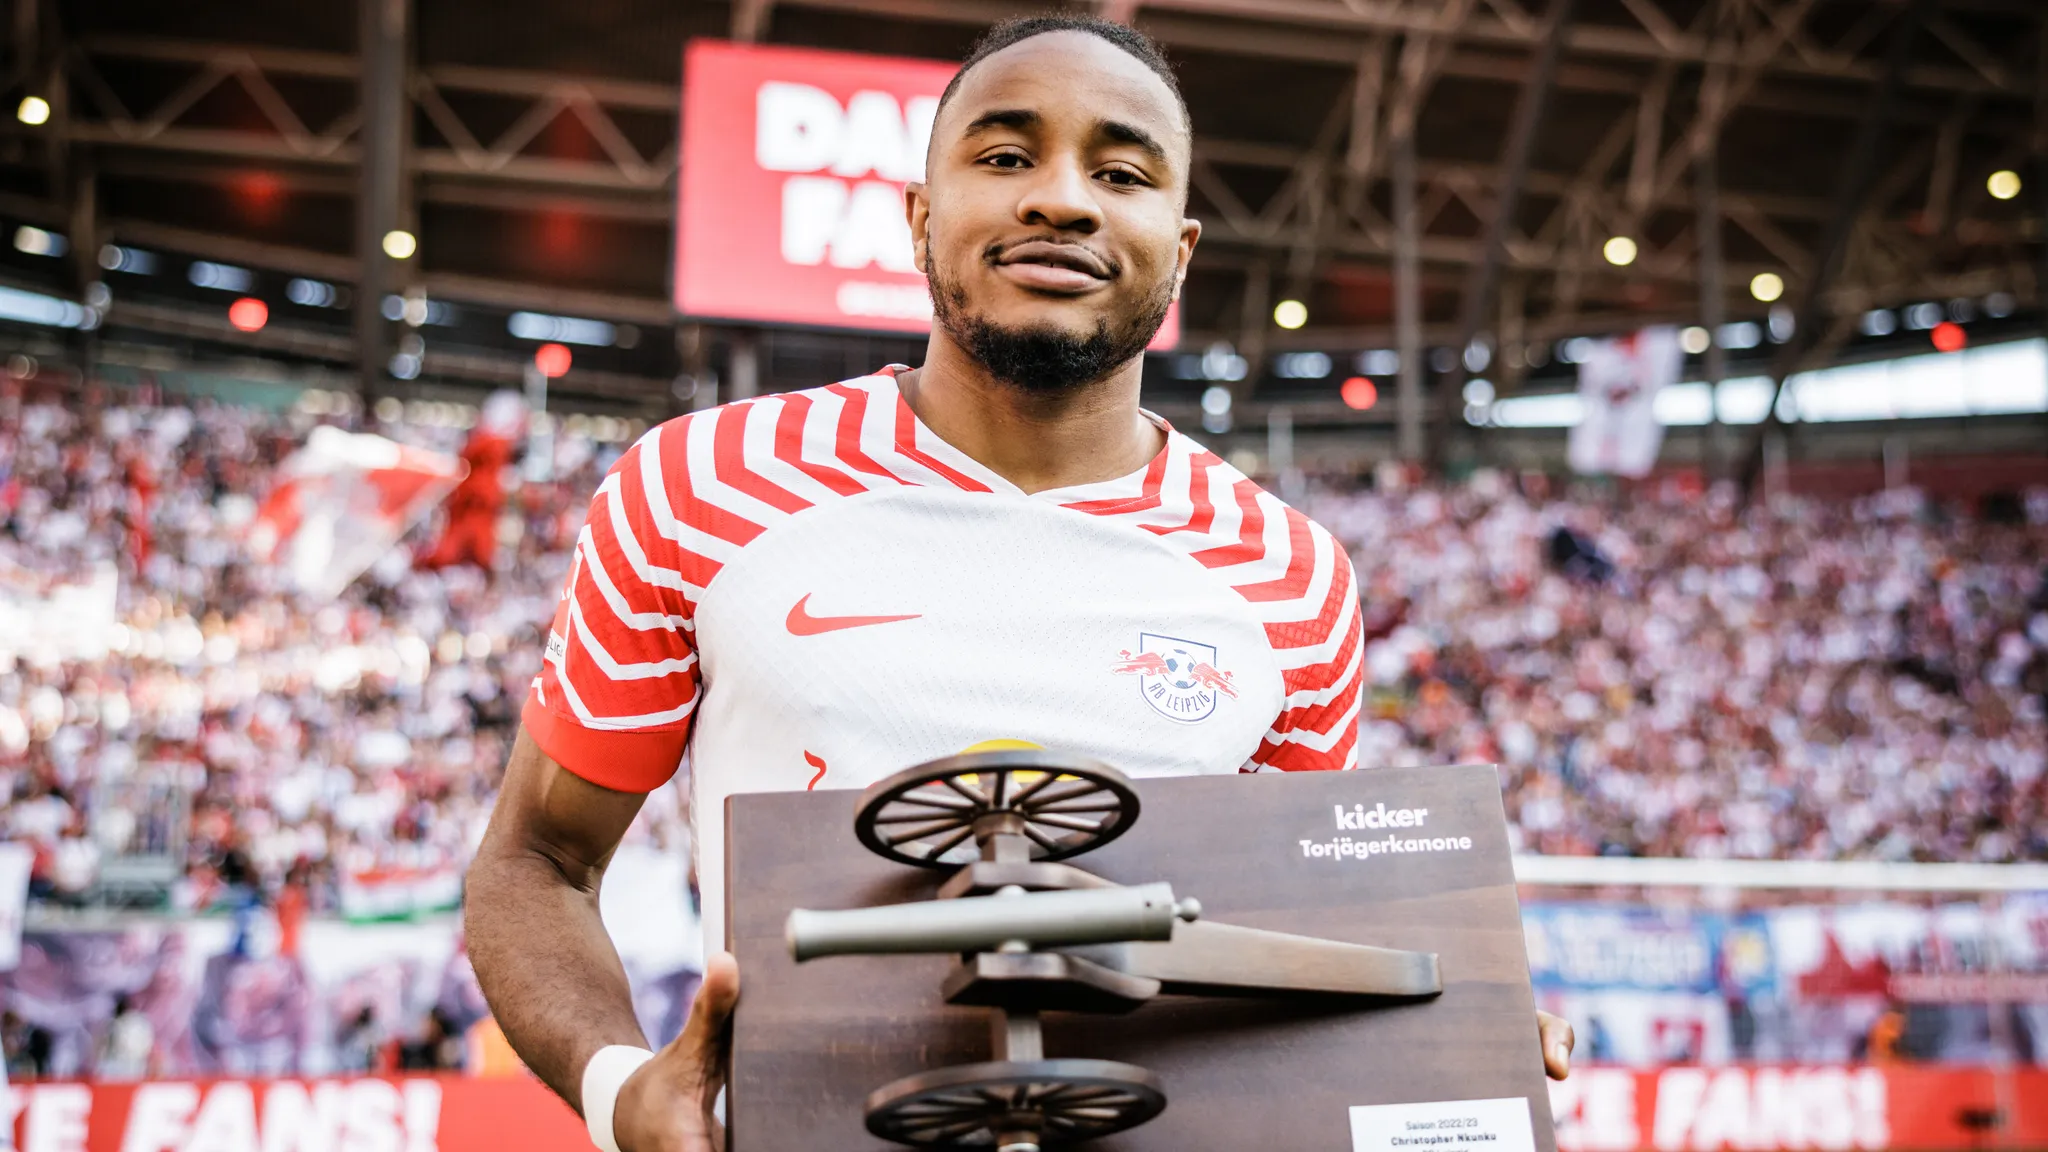 Christopher Nkunku scored twice in the last game of the 2022/23 season against FC Schalke 04 and took the top scorer in the Bundesliga with 16 goals.